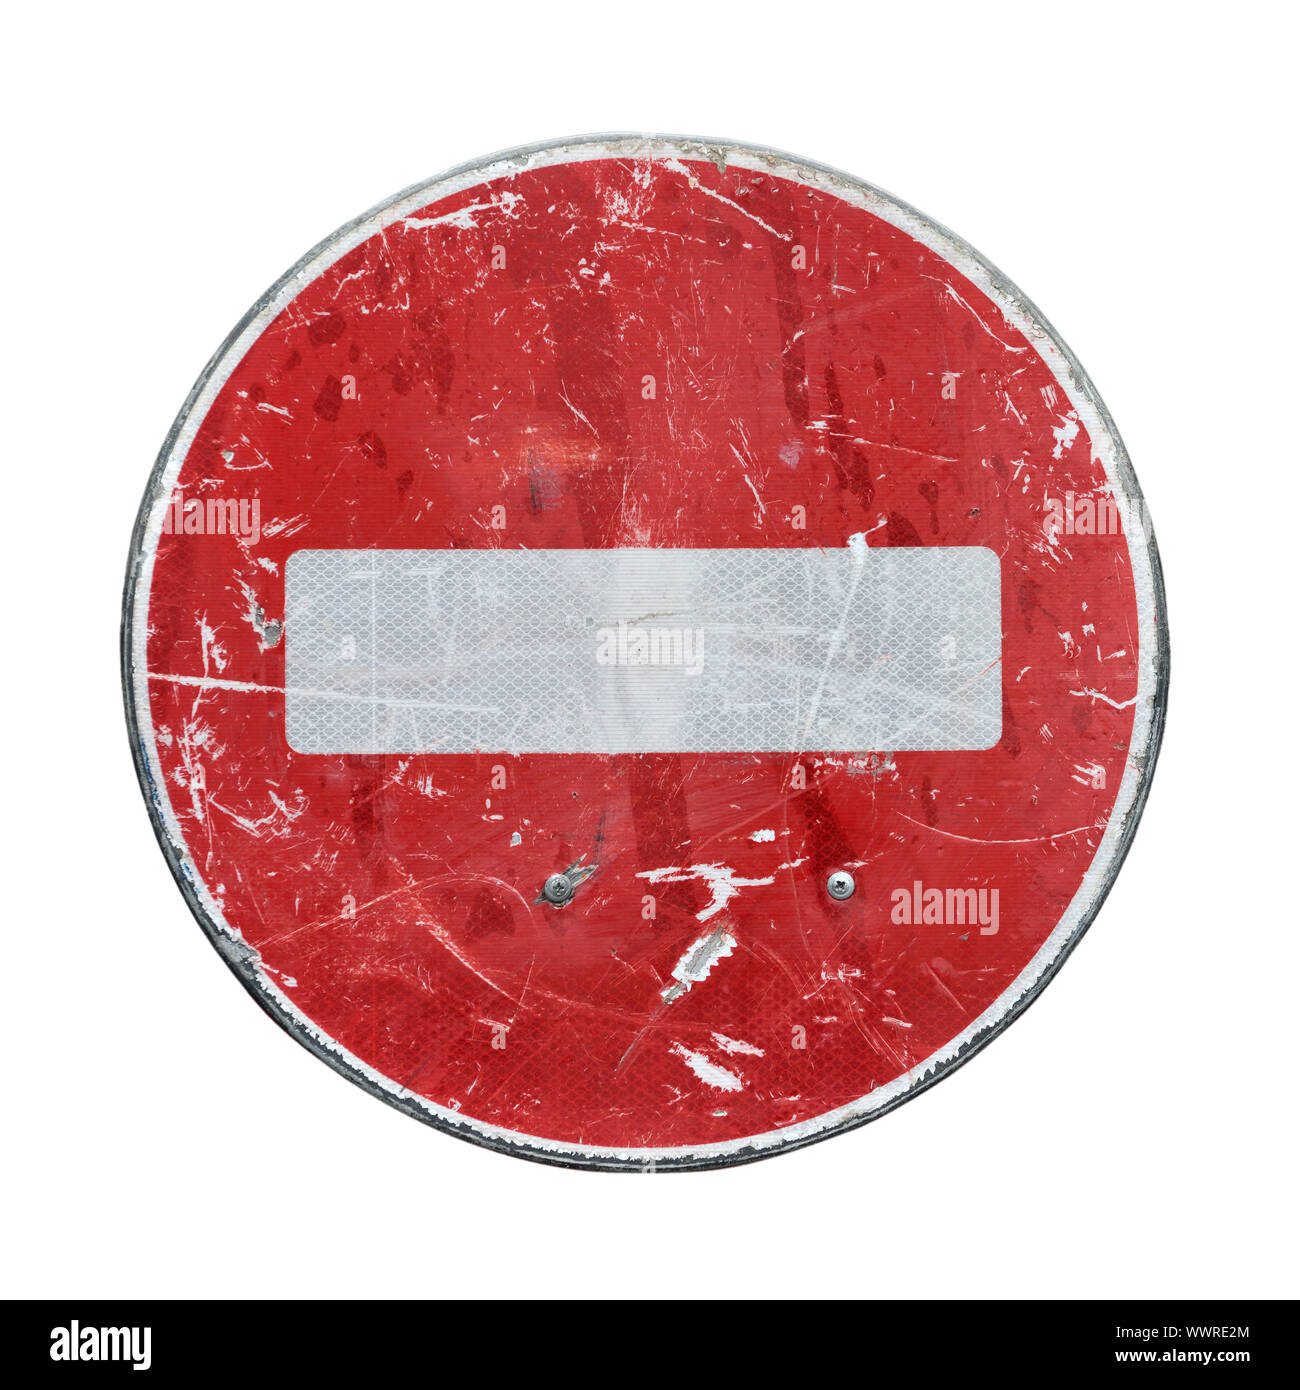 Old red stop road sign isolated on white background. Stock Photo